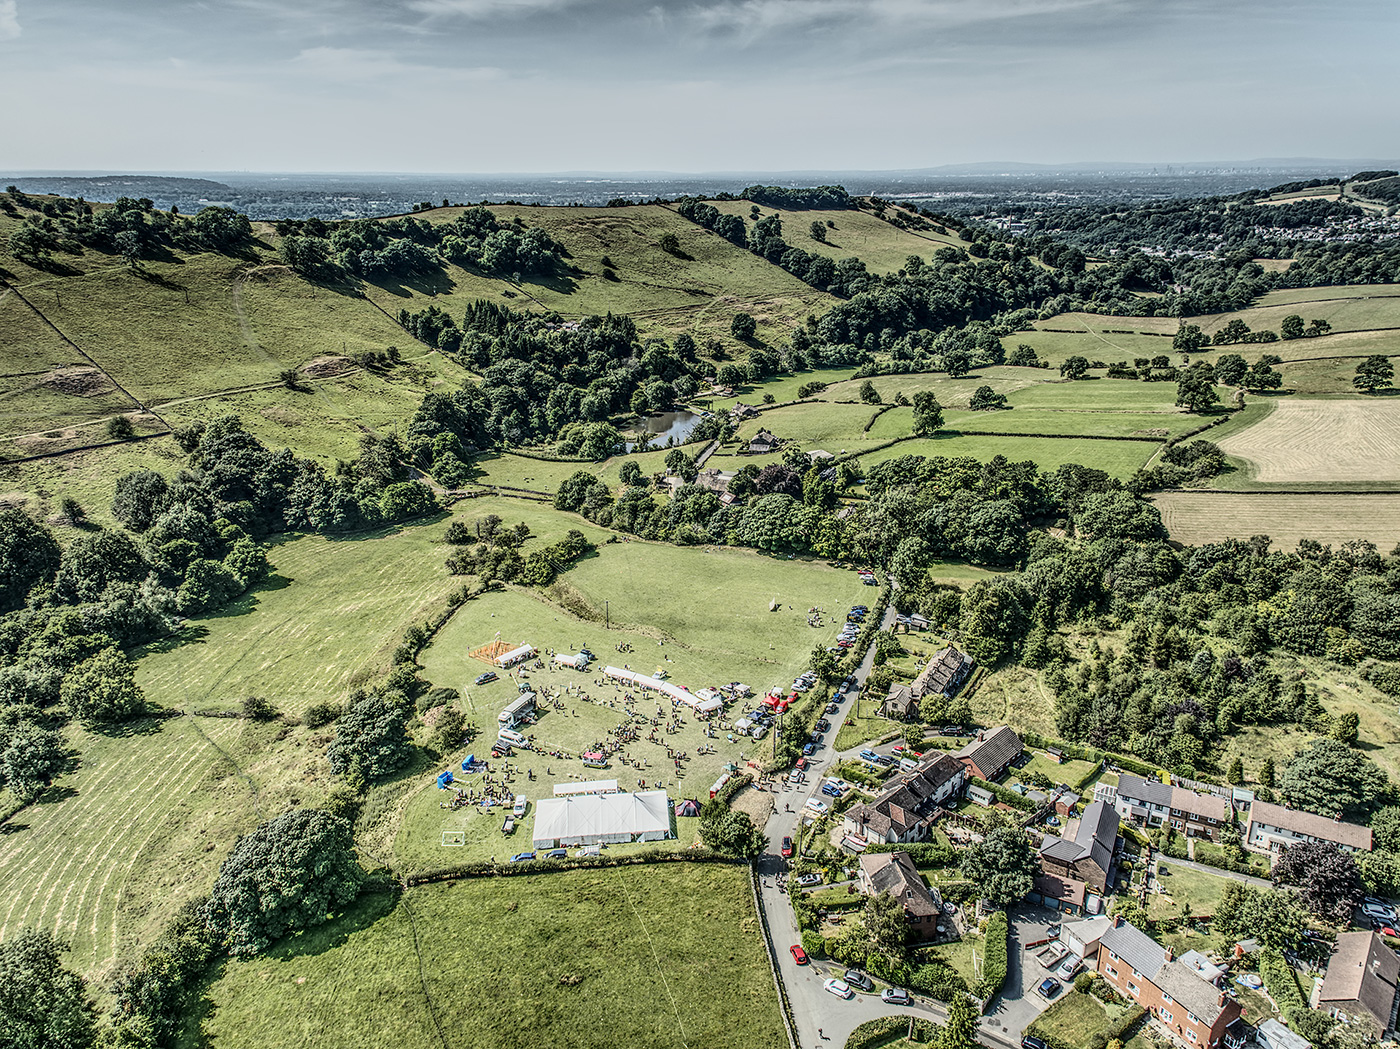 Drone Services Rainow Fete near Macclesfield capturing the apmosphere of a summers day gathering from the surrounding areas of Kerridge Wildboarclough Wilmslow Styal